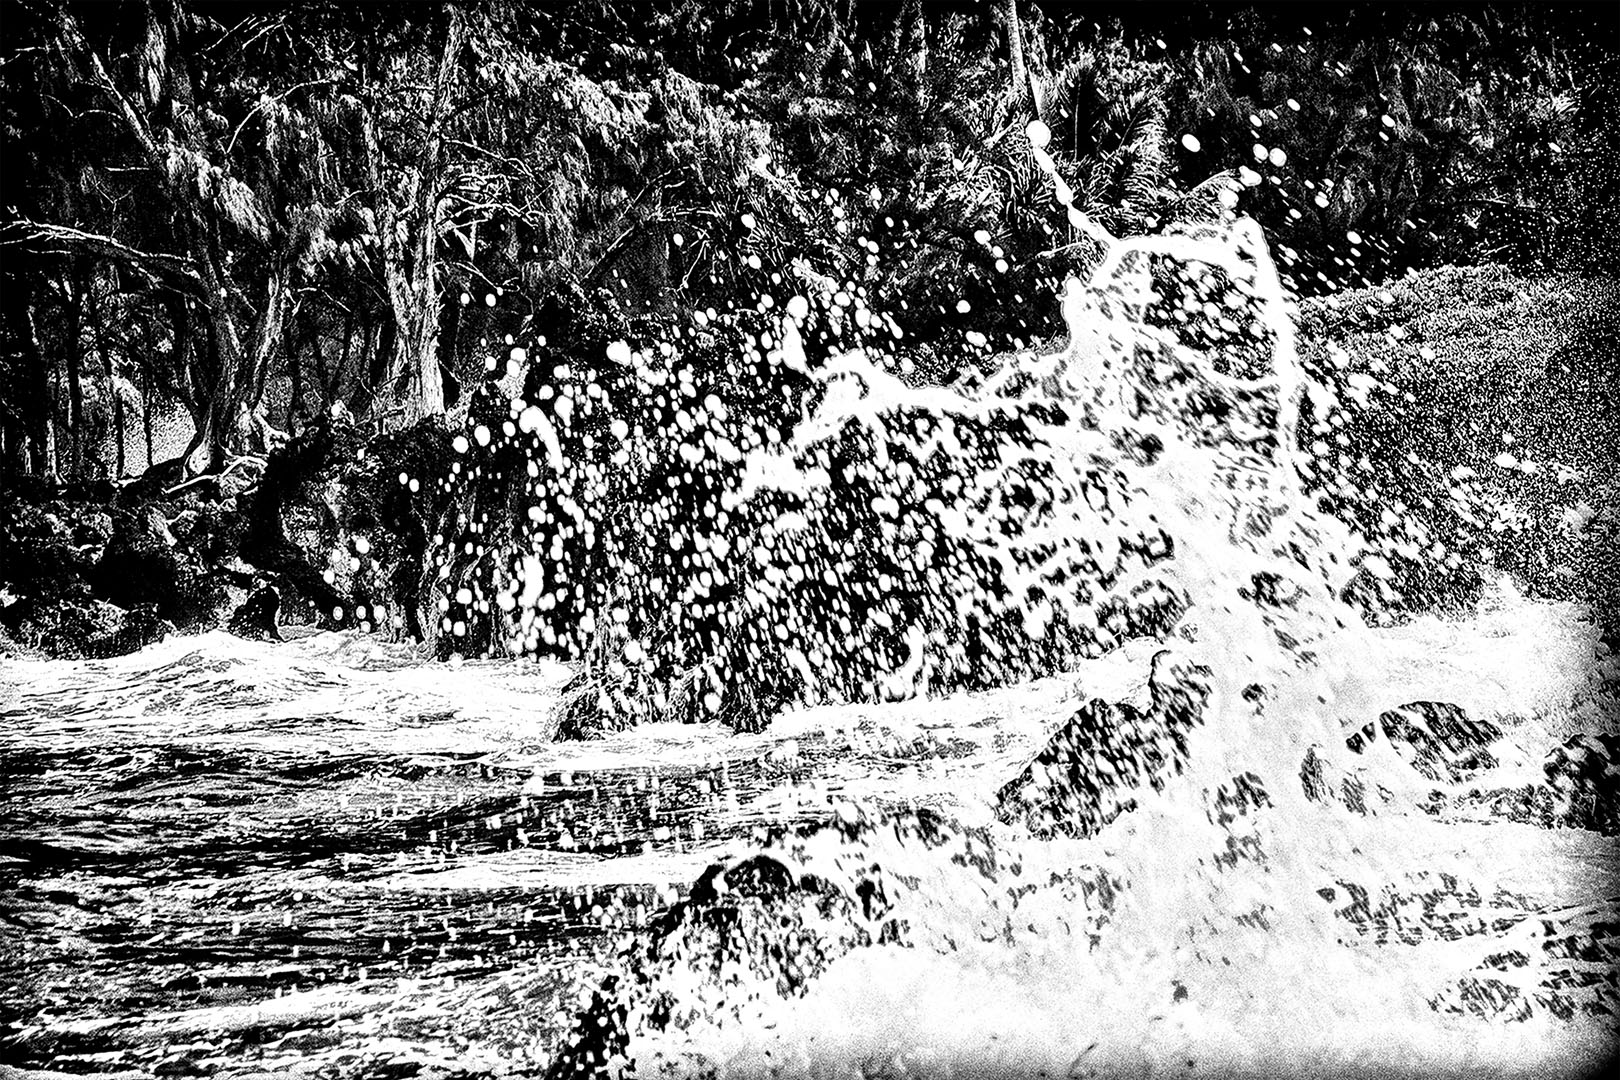 Holly Gordon, Water Music #5009, 2012. Archival pigment print on paper, 28x18.6, (31x21 framed)